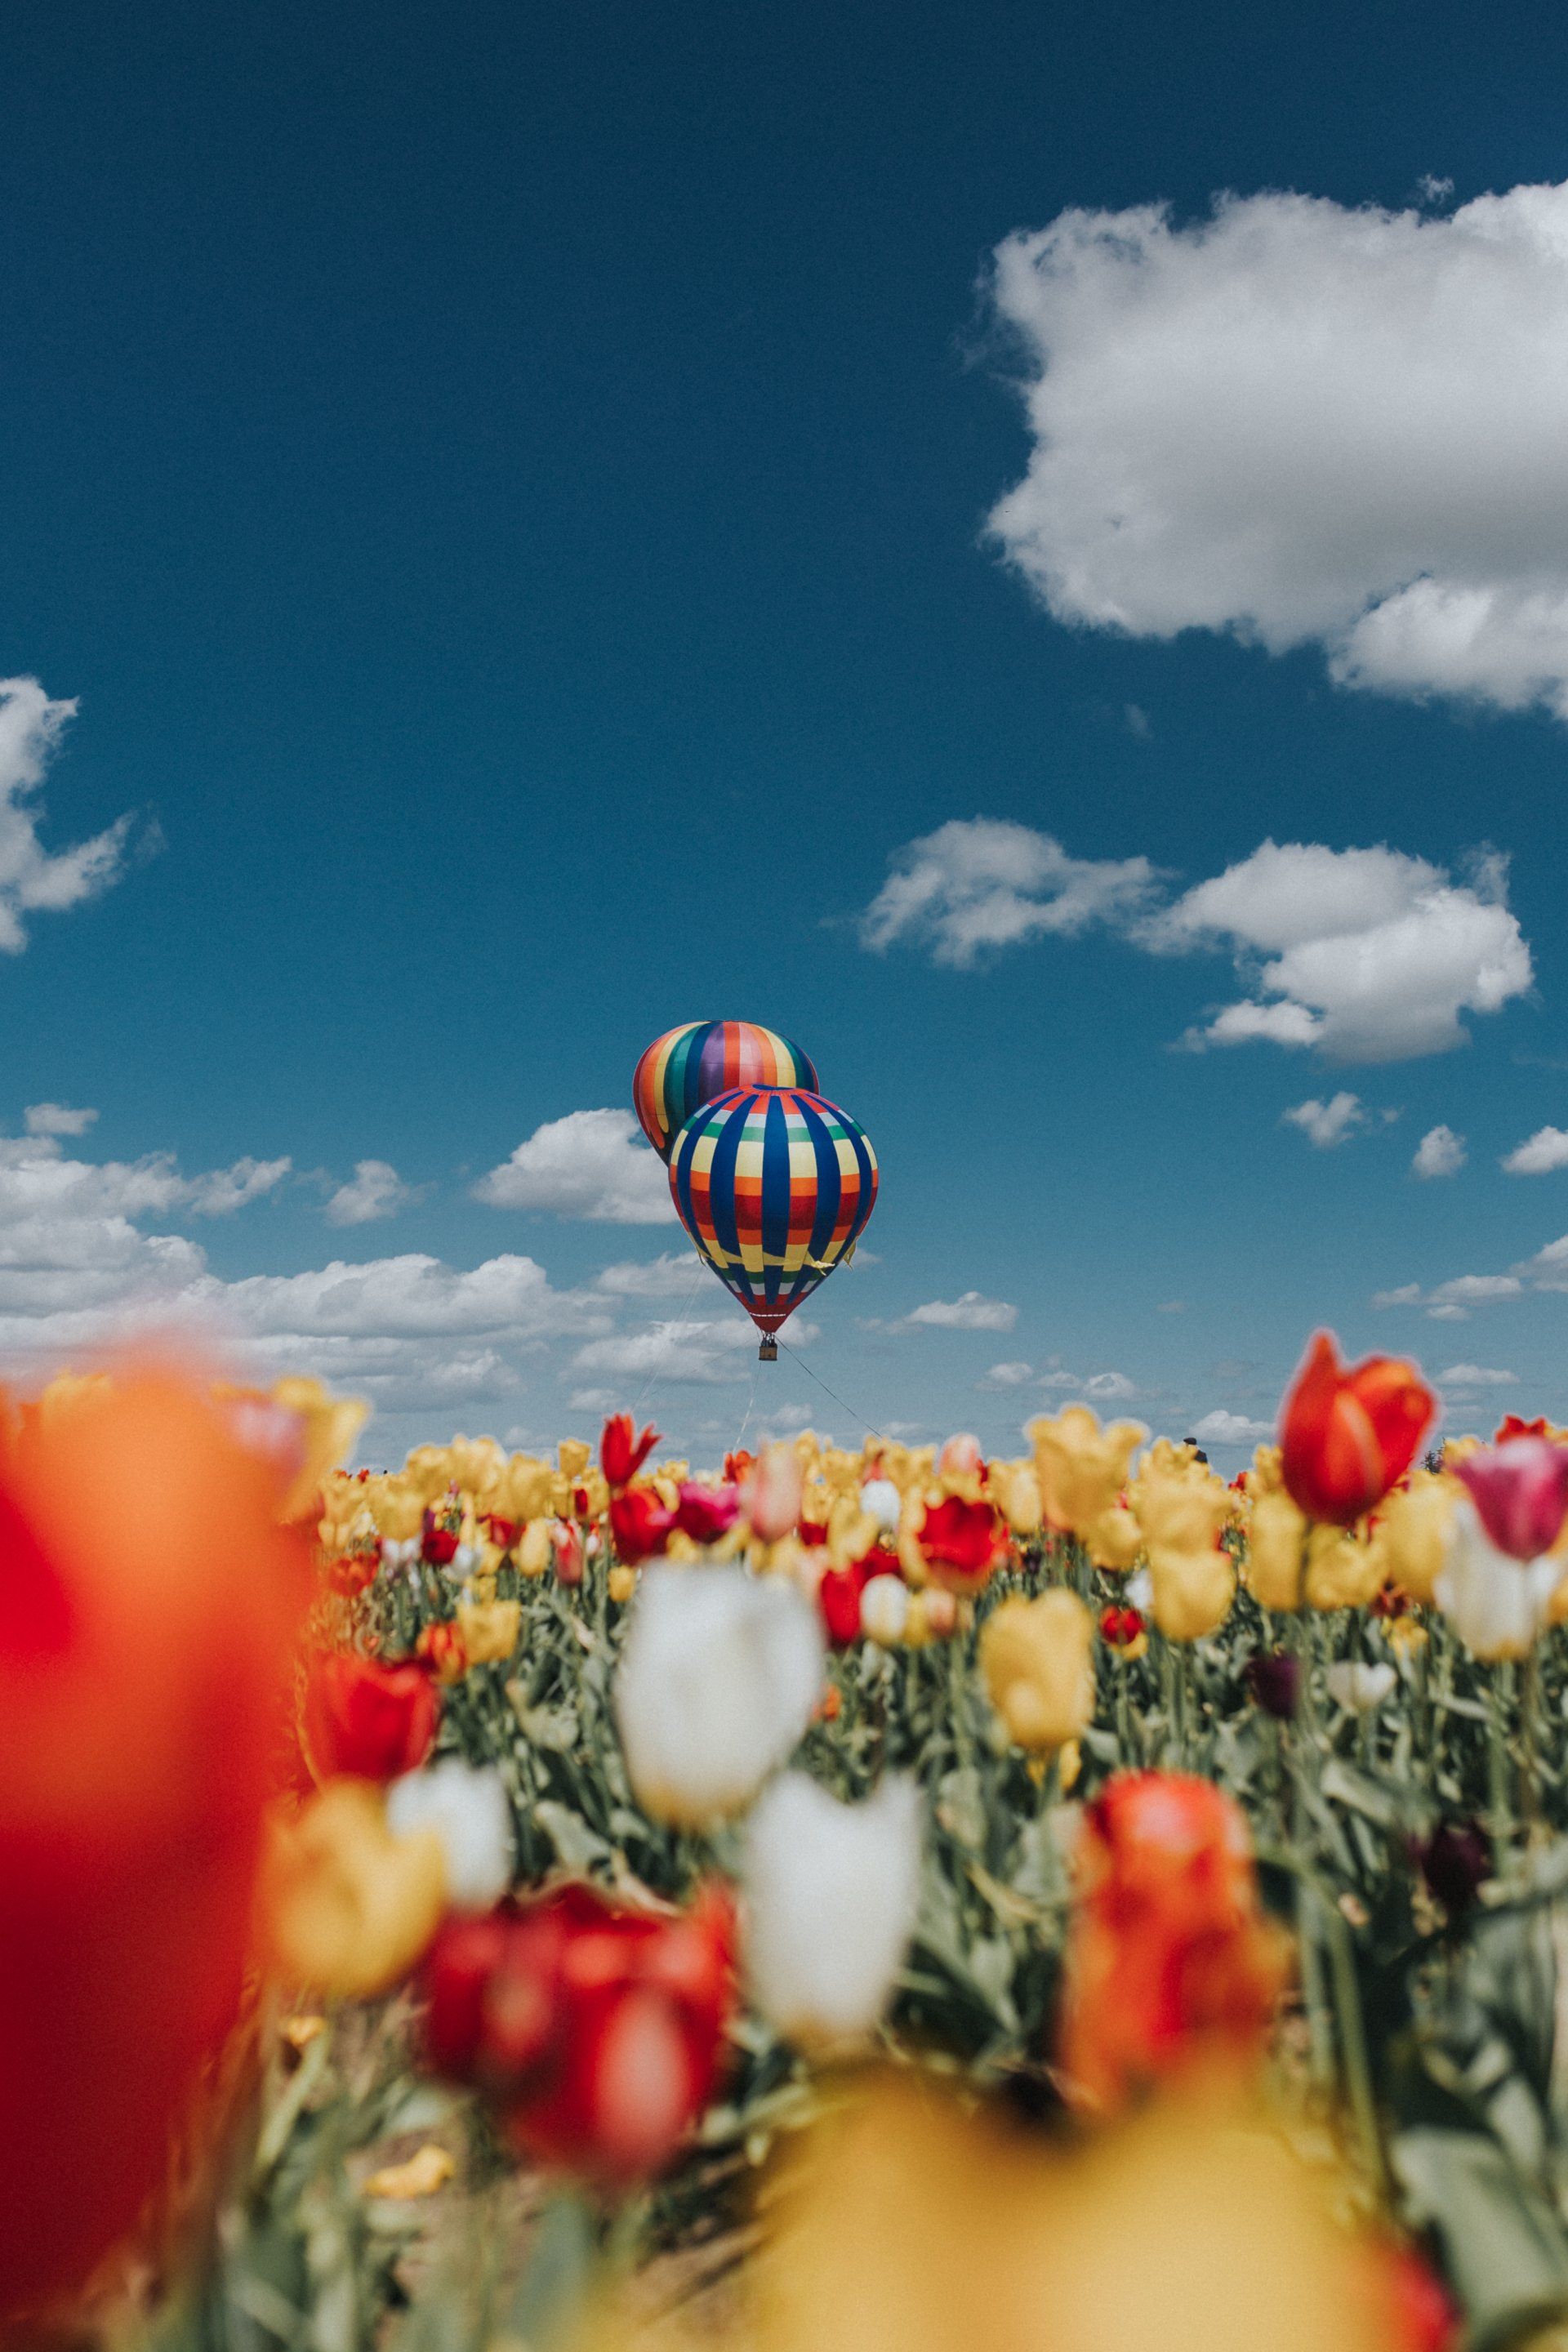 Image of 2 colorful hot air ballons on a bright sunny day with tulips in foreground.